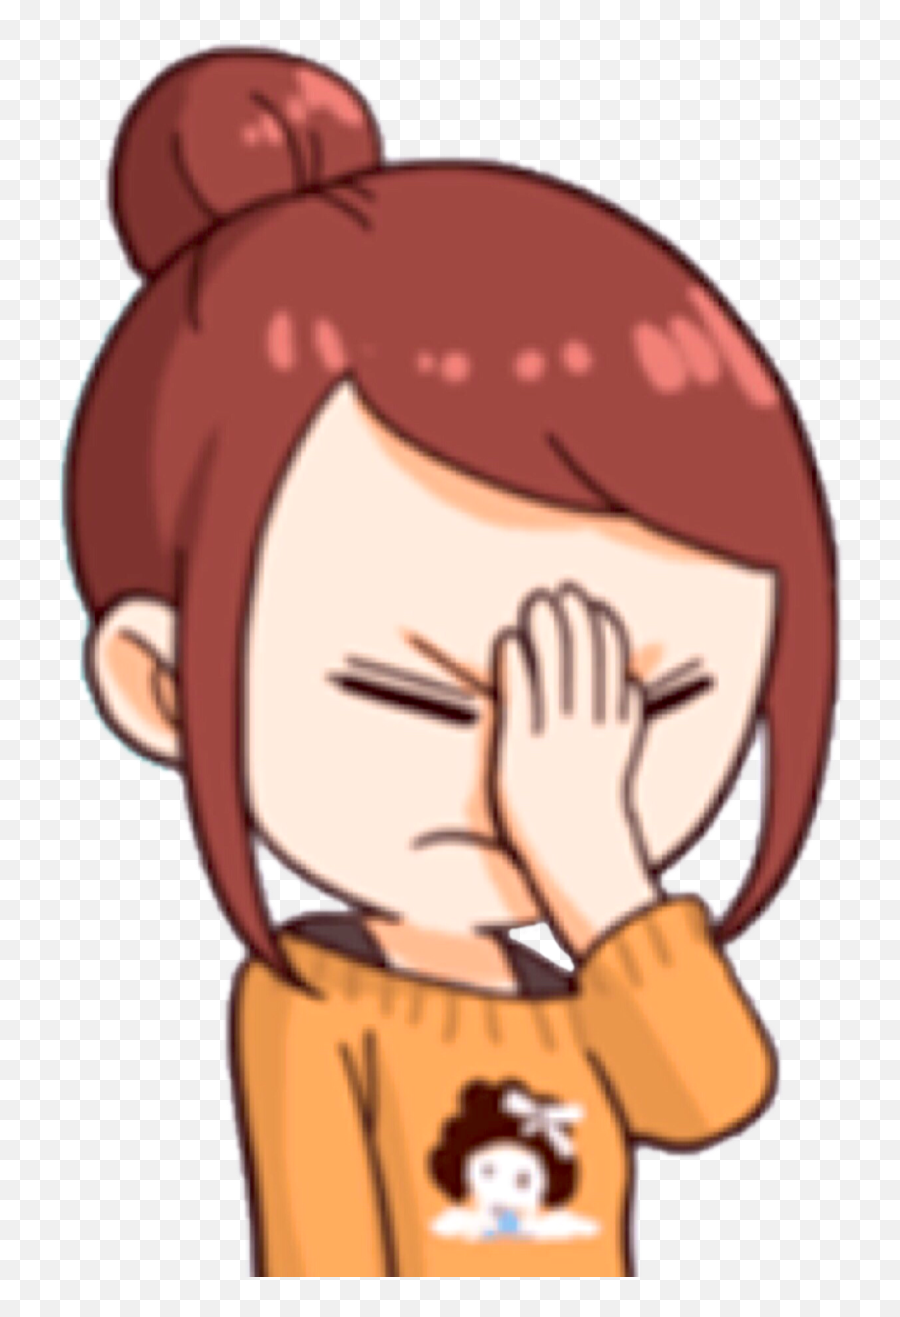 Pulse And Thought - Fangirl Activities Line Sticker Emoji,Snorting Emoji